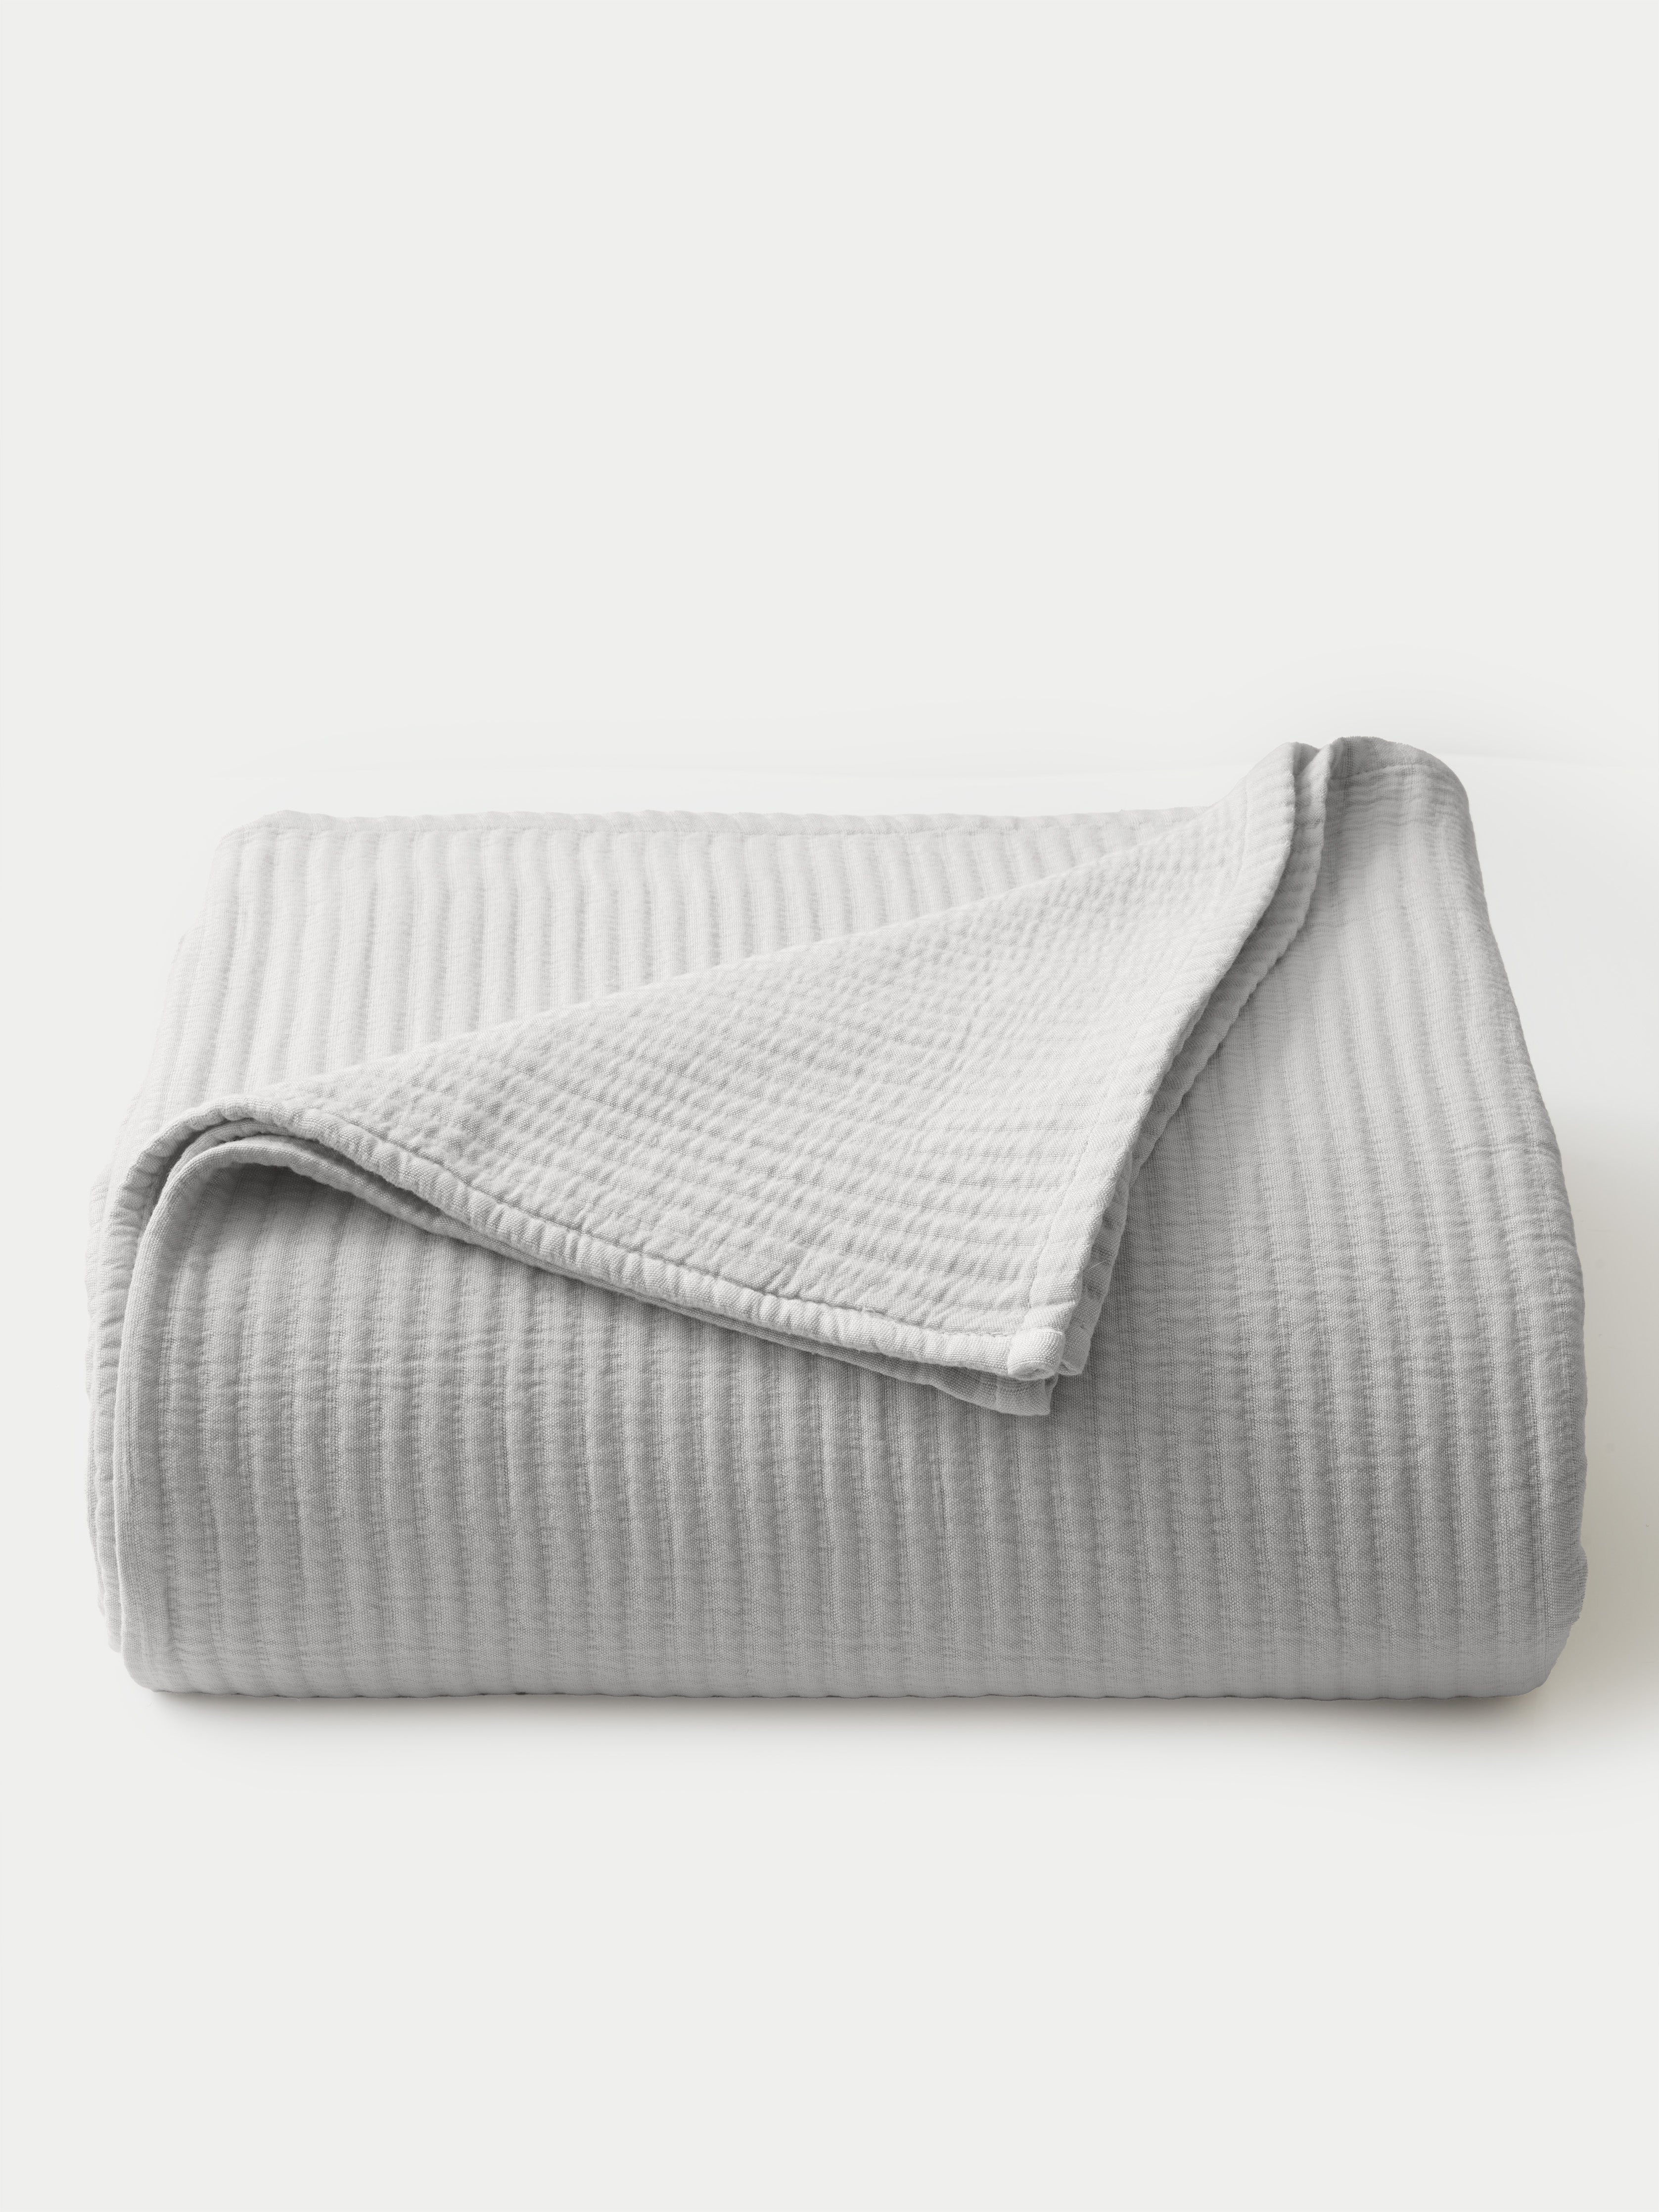 Light Grey coverlet folded with white background |Color:Light Grey